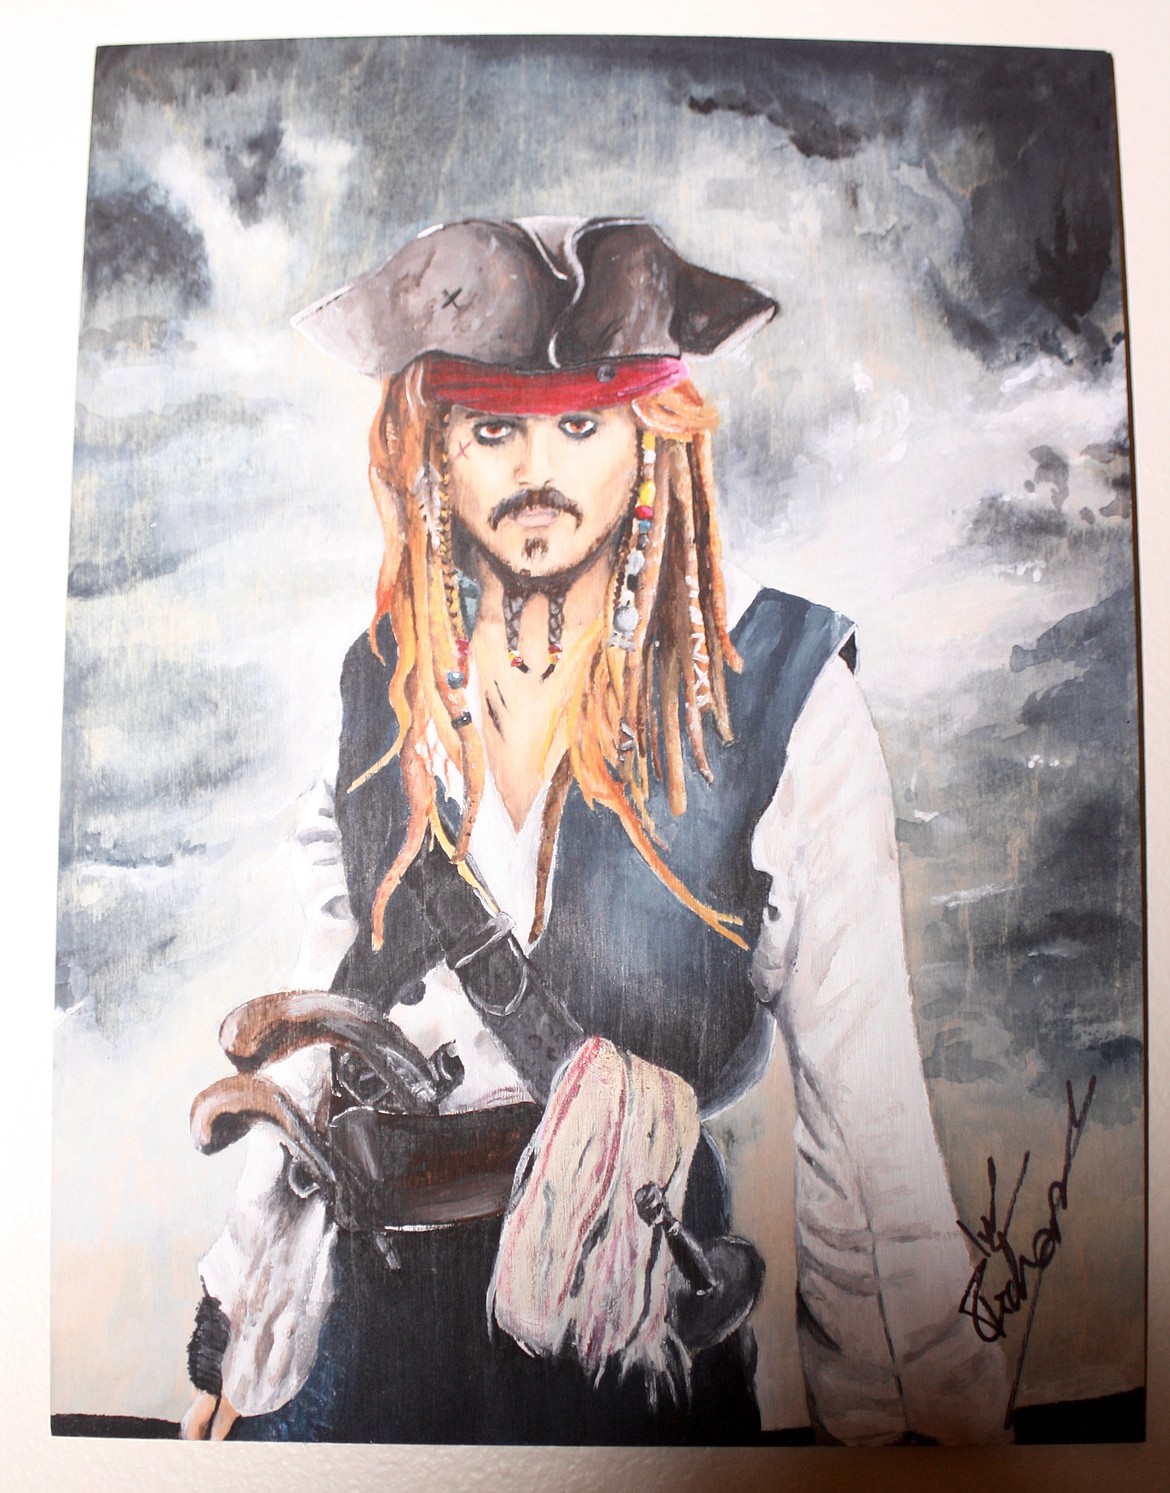 &#147;CAPTAIN SPARROW,&#148; acrylic on a wood panel, by Ivy Richards.